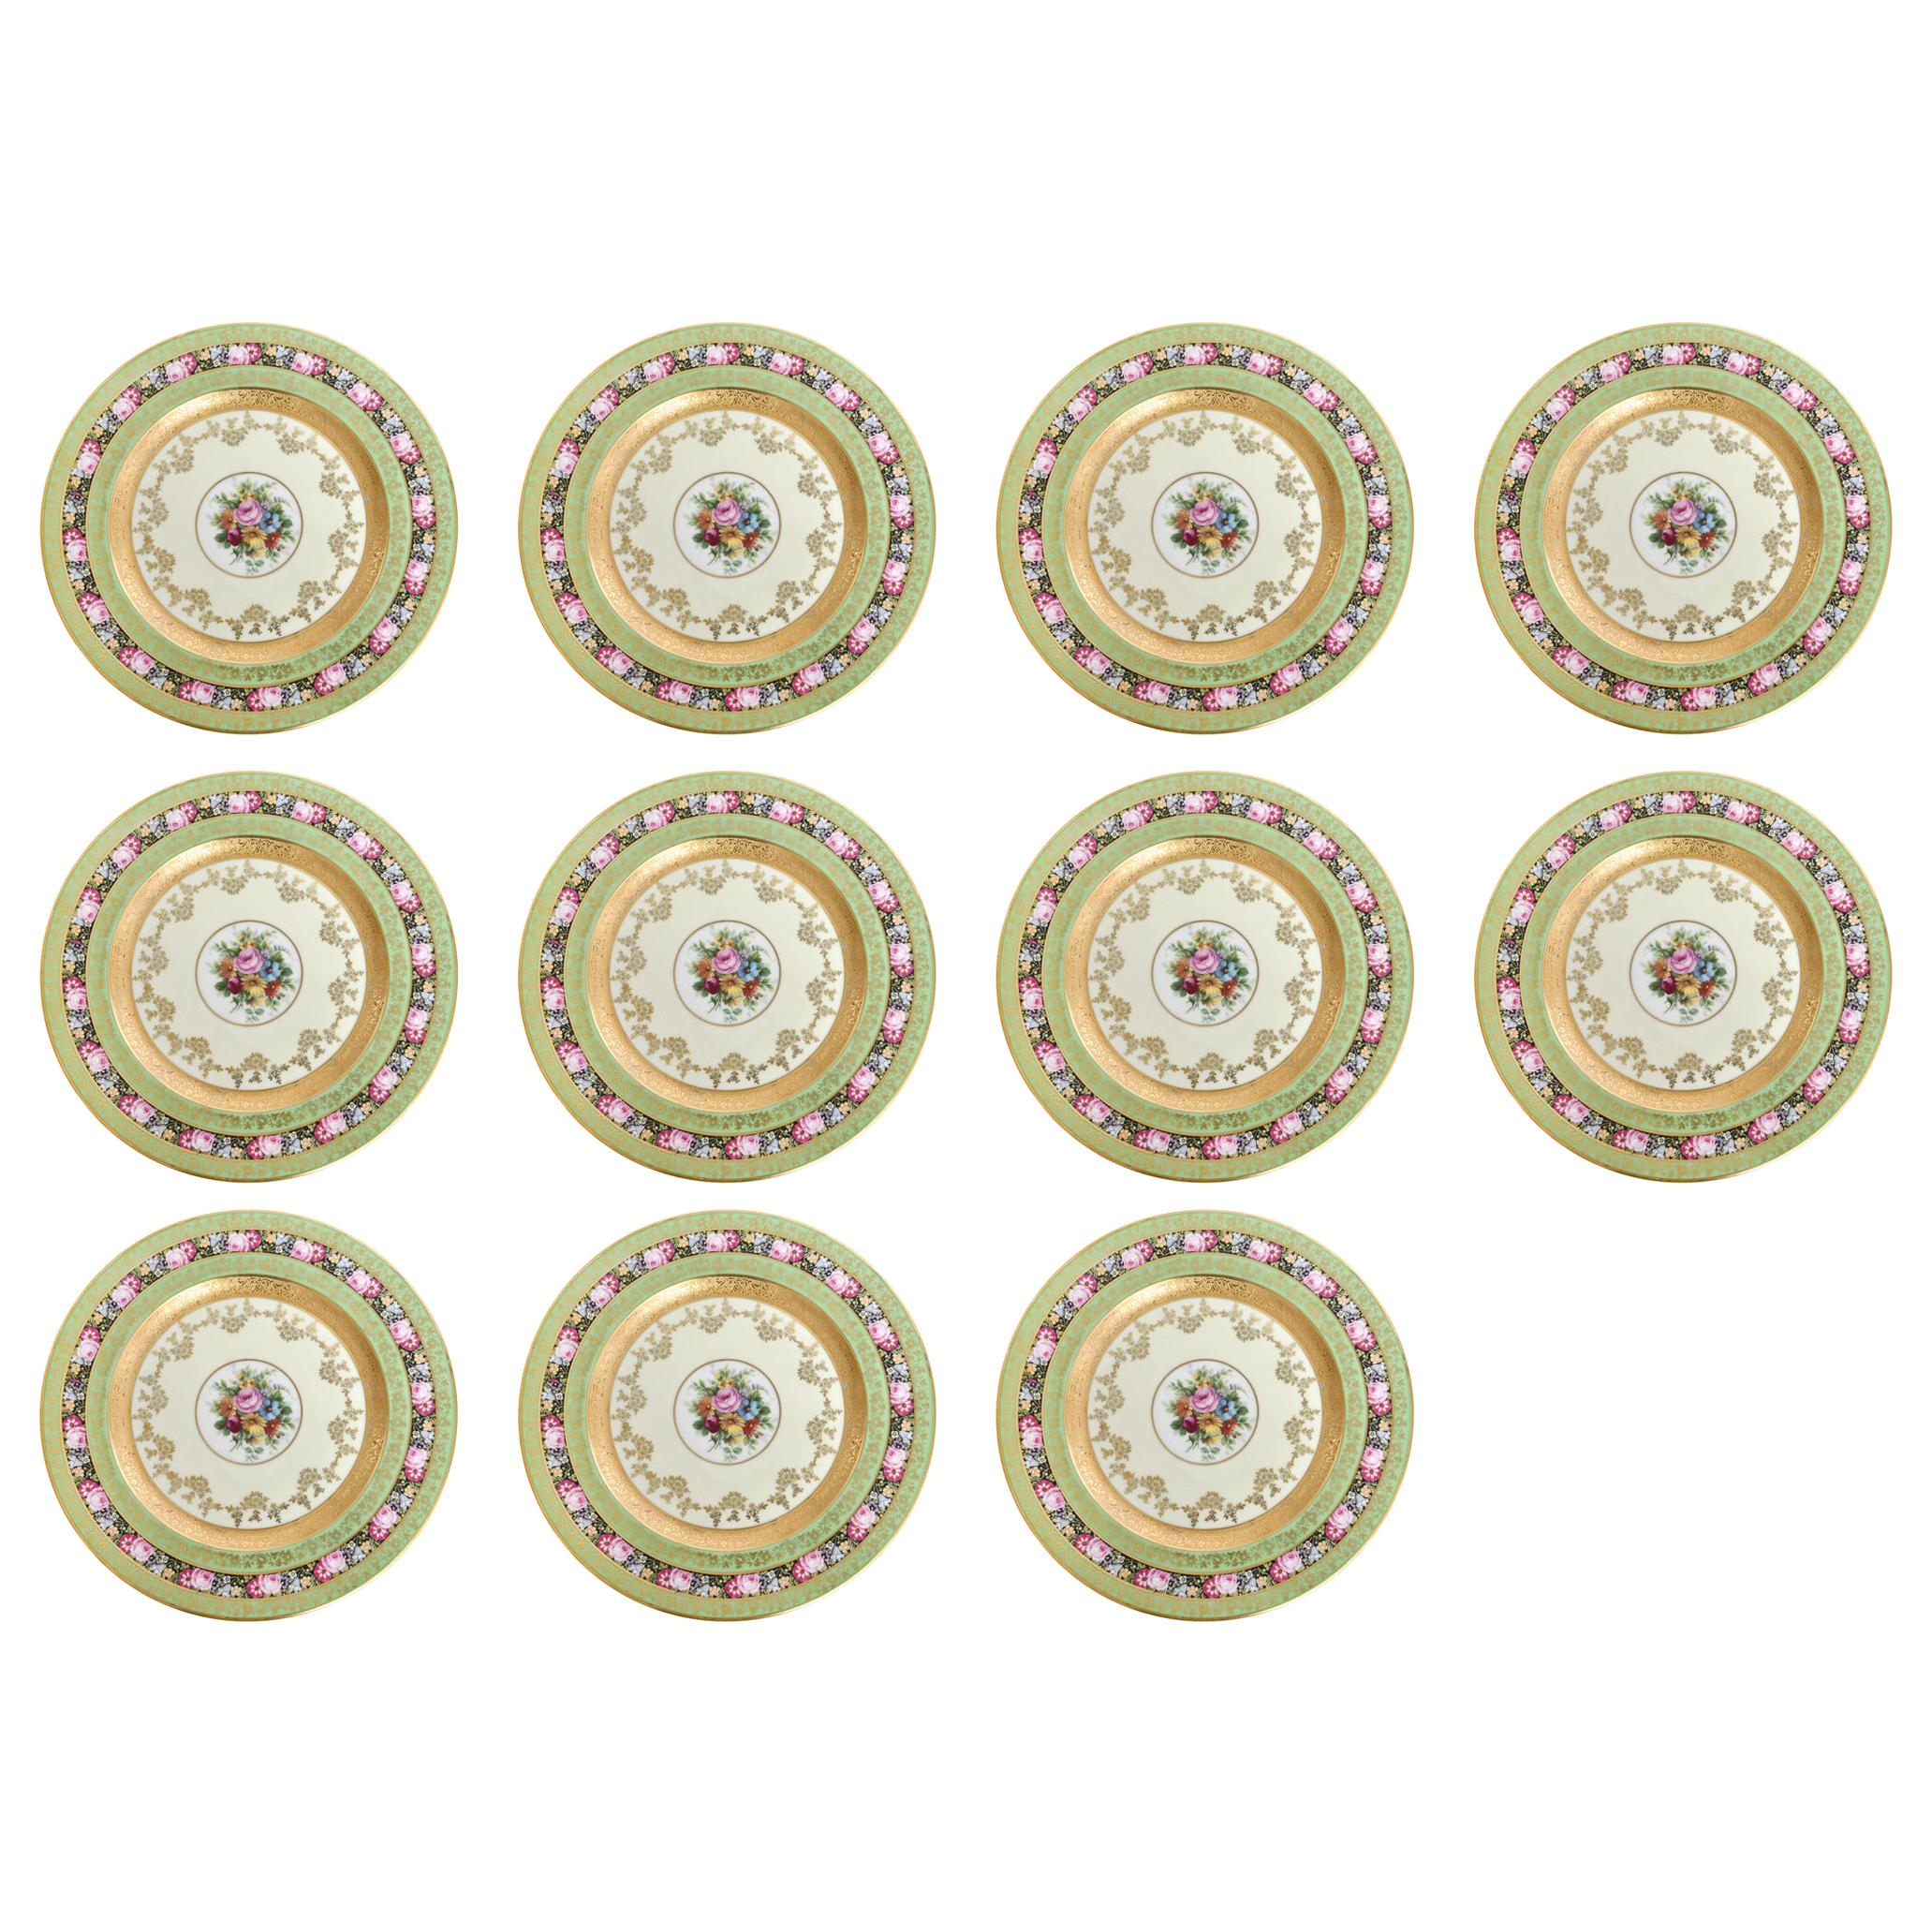 Rare Heinrich & Co. Selb Floral Gold Encrusted Service Cabinet Plates Set of 11